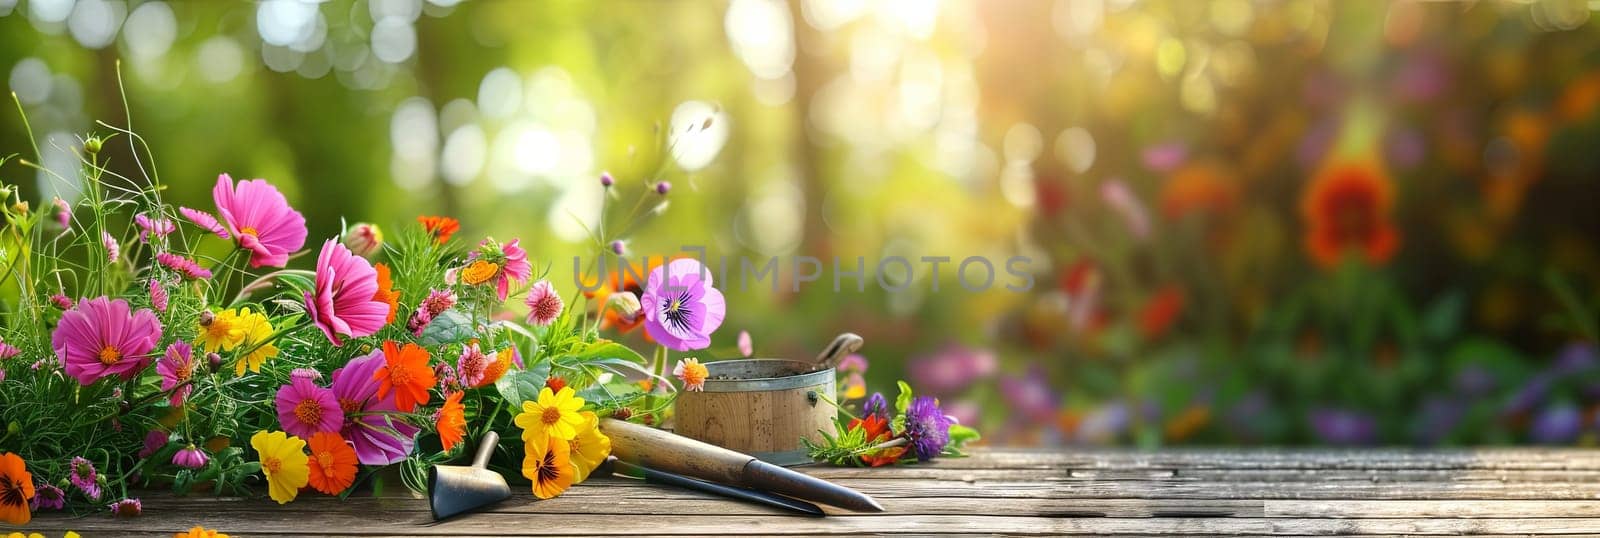 Various colorful flowers and garden tools arranged on a wooden table, with a blurred natural background.